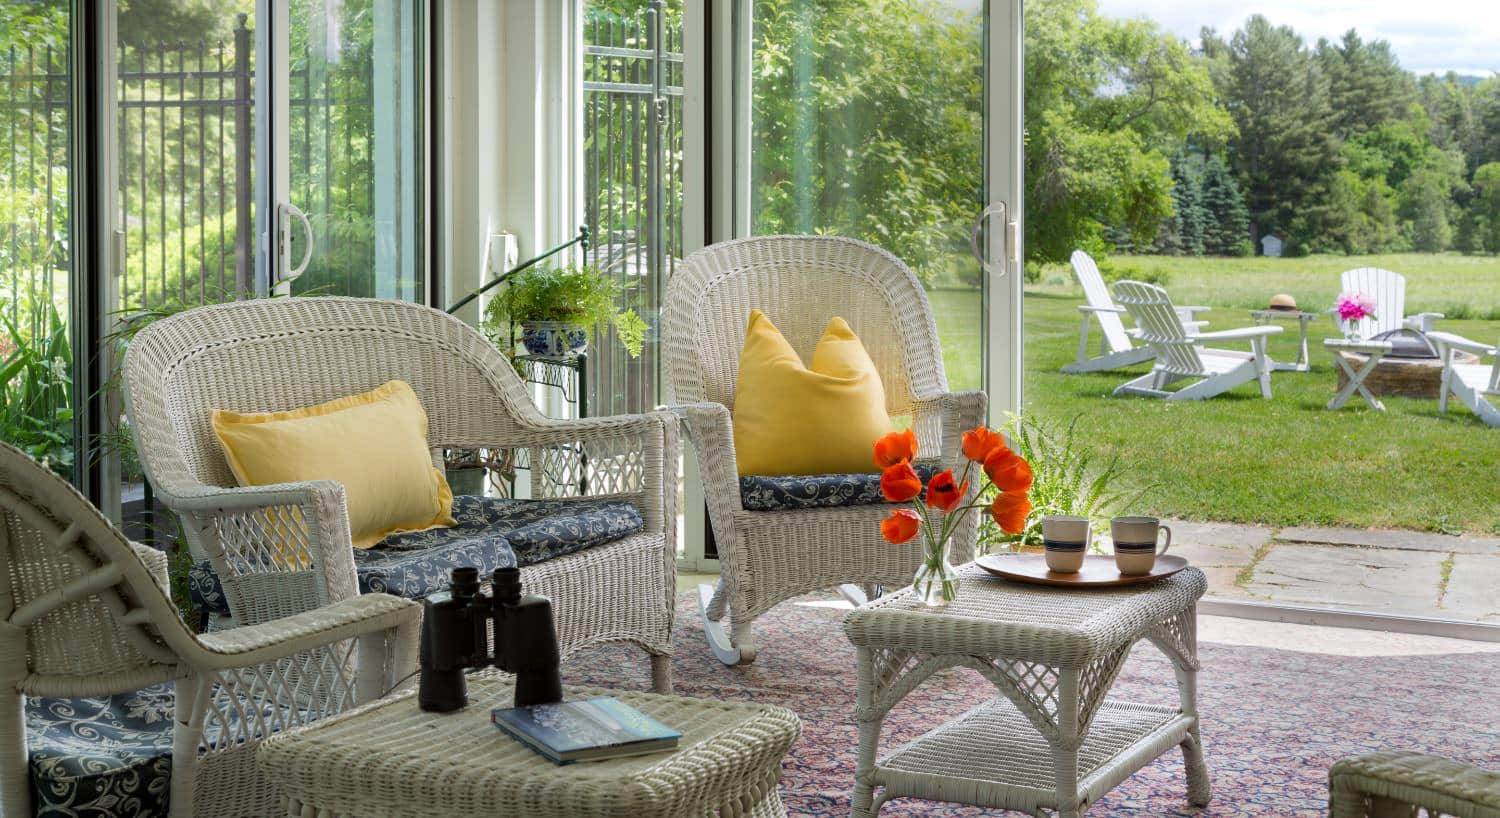 Sun room with white wicker patio furniture, opened sliding glass doors, and view of the firepit area with white adirondack chairs